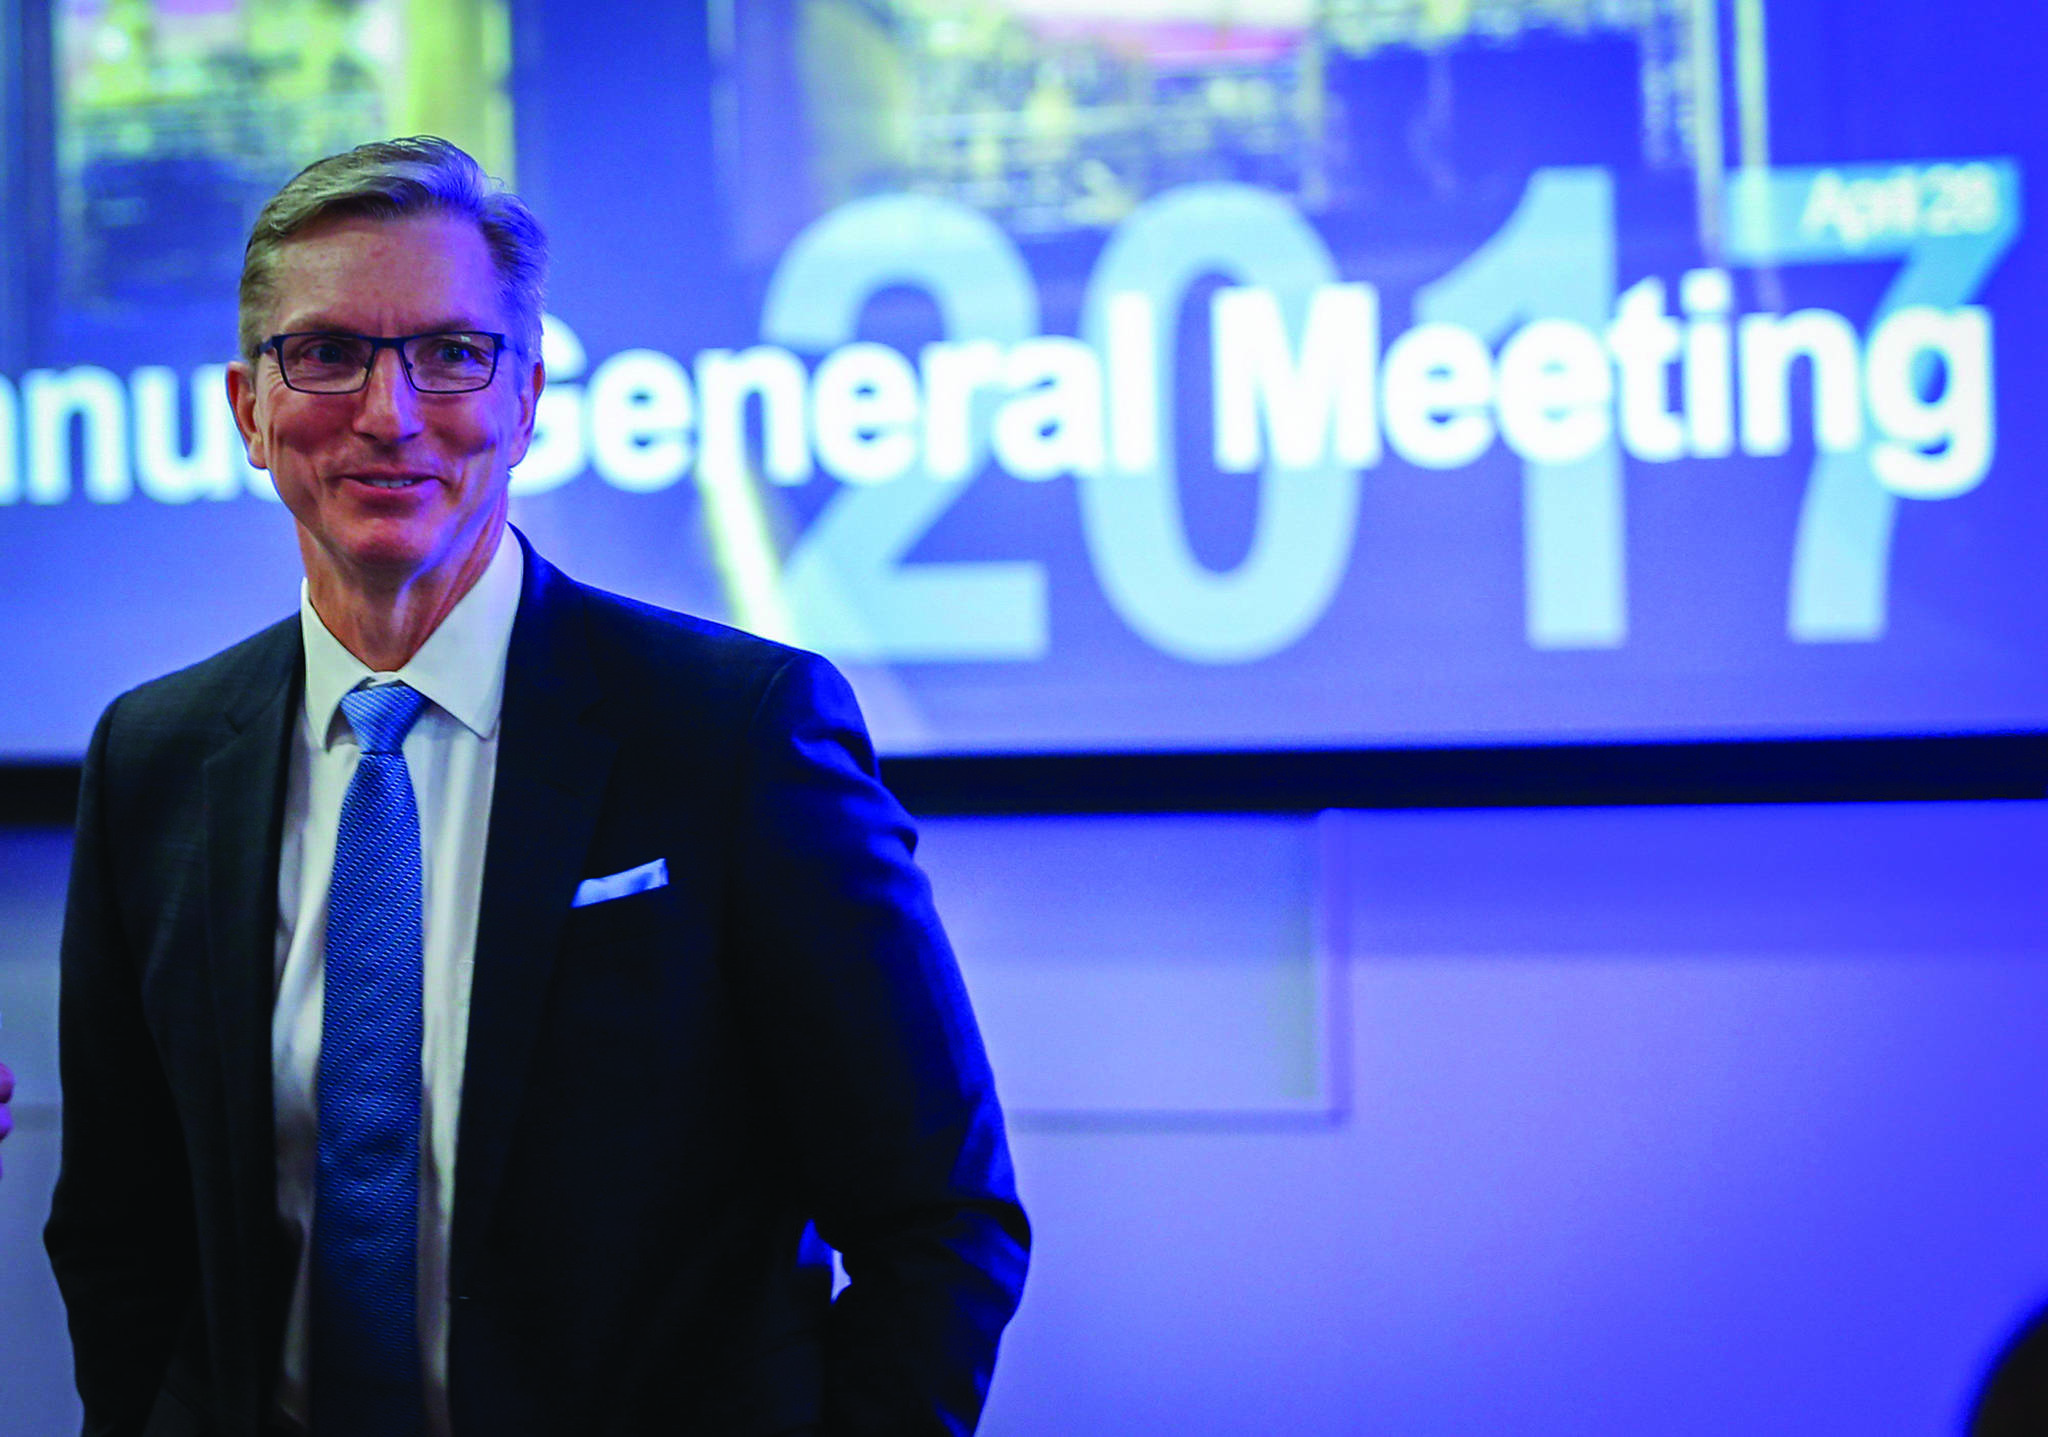 Imperial Oil president and CEO Rich Kruger prepares to address the company’s annual meeting in Calgary, Friday, April 28, 2017.THE CANADIAN PRESS/Jeff McIntosh